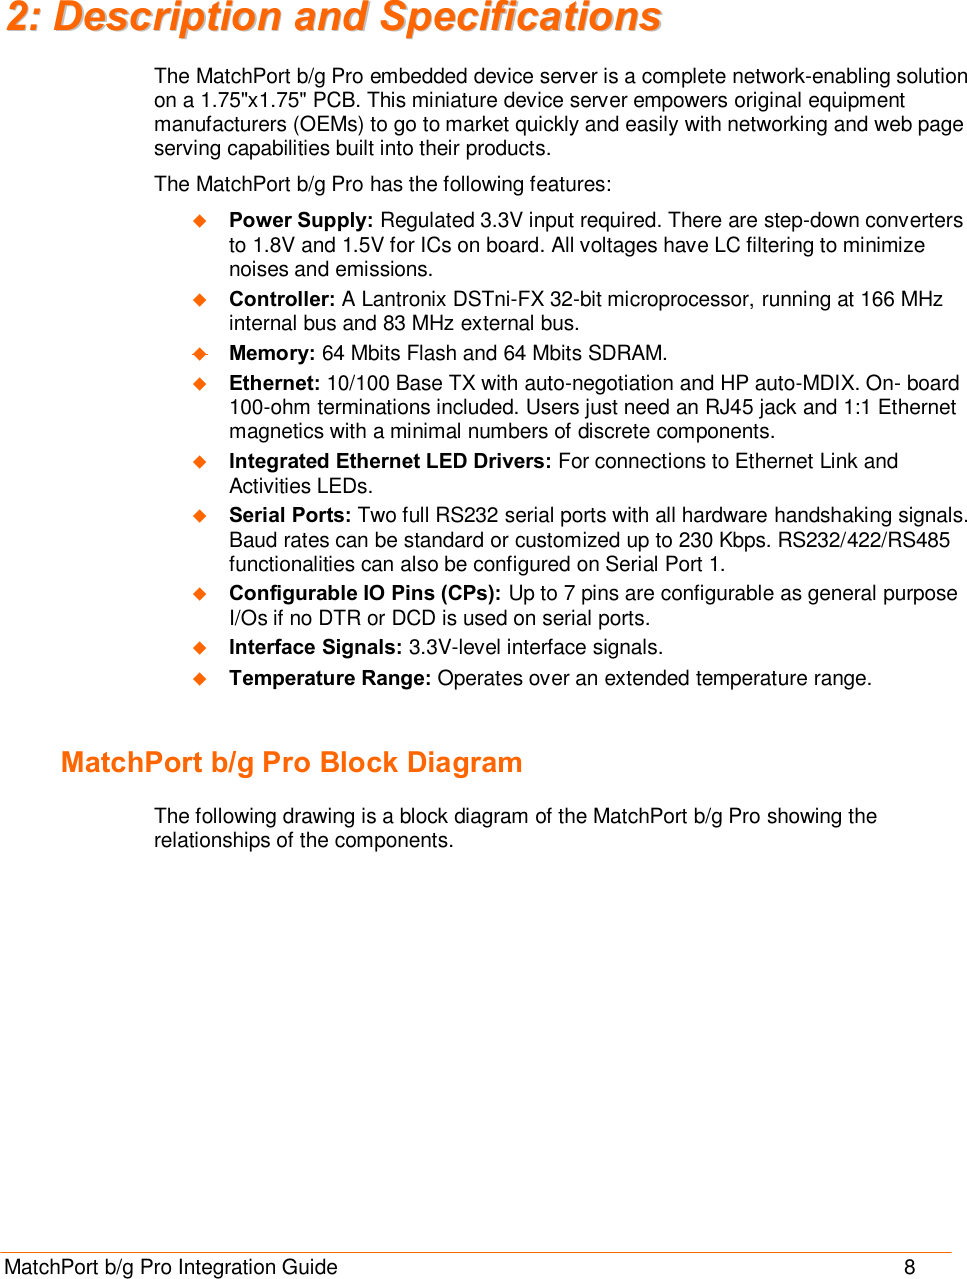  MatchPort b/g Pro Integration Guide                                       8 22::  DDeessccrriippttiioonn  aanndd  SSppeecciiffiiccaattiioonnss  The MatchPort b/g Pro embedded device server is a complete network-enabling solution on a 1.75&quot;x1.75&quot; PCB. This miniature device server empowers original equipment manufacturers (OEMs) to go to market quickly and easily with networking and web page serving capabilities built into their products. The MatchPort b/g Pro has the following features: u Power Supply: Regulated 3.3V input required. There are step-down converters to 1.8V and 1.5V for ICs on board. All voltages have LC filtering to minimize noises and emissions. u Controller: A Lantronix DSTni-FX 32-bit microprocessor, running at 166 MHz internal bus and 83 MHz external bus. u Memory: 64 Mbits Flash and 64 Mbits SDRAM.  u Ethernet: 10/100 Base TX with auto-negotiation and HP auto-MDIX. On- board 100-ohm terminations included. Users just need an RJ45 jack and 1:1 Ethernet magnetics with a minimal numbers of discrete components. u Integrated Ethernet LED Drivers: For connections to Ethernet Link and Activities LEDs.  u Serial Ports: Two full RS232 serial ports with all hardware handshaking signals. Baud rates can be standard or customized up to 230 Kbps. RS232/422/RS485 functionalities can also be configured on Serial Port 1. u Configurable IO Pins (CPs): Up to 7 pins are configurable as general purpose I/Os if no DTR or DCD is used on serial ports. u Interface Signals: 3.3V-level interface signals. u Temperature Range: Operates over an extended temperature range.  MatchPort b/g Pro Block Diagram The following drawing is a block diagram of the MatchPort b/g Pro showing the relationships of the components. 